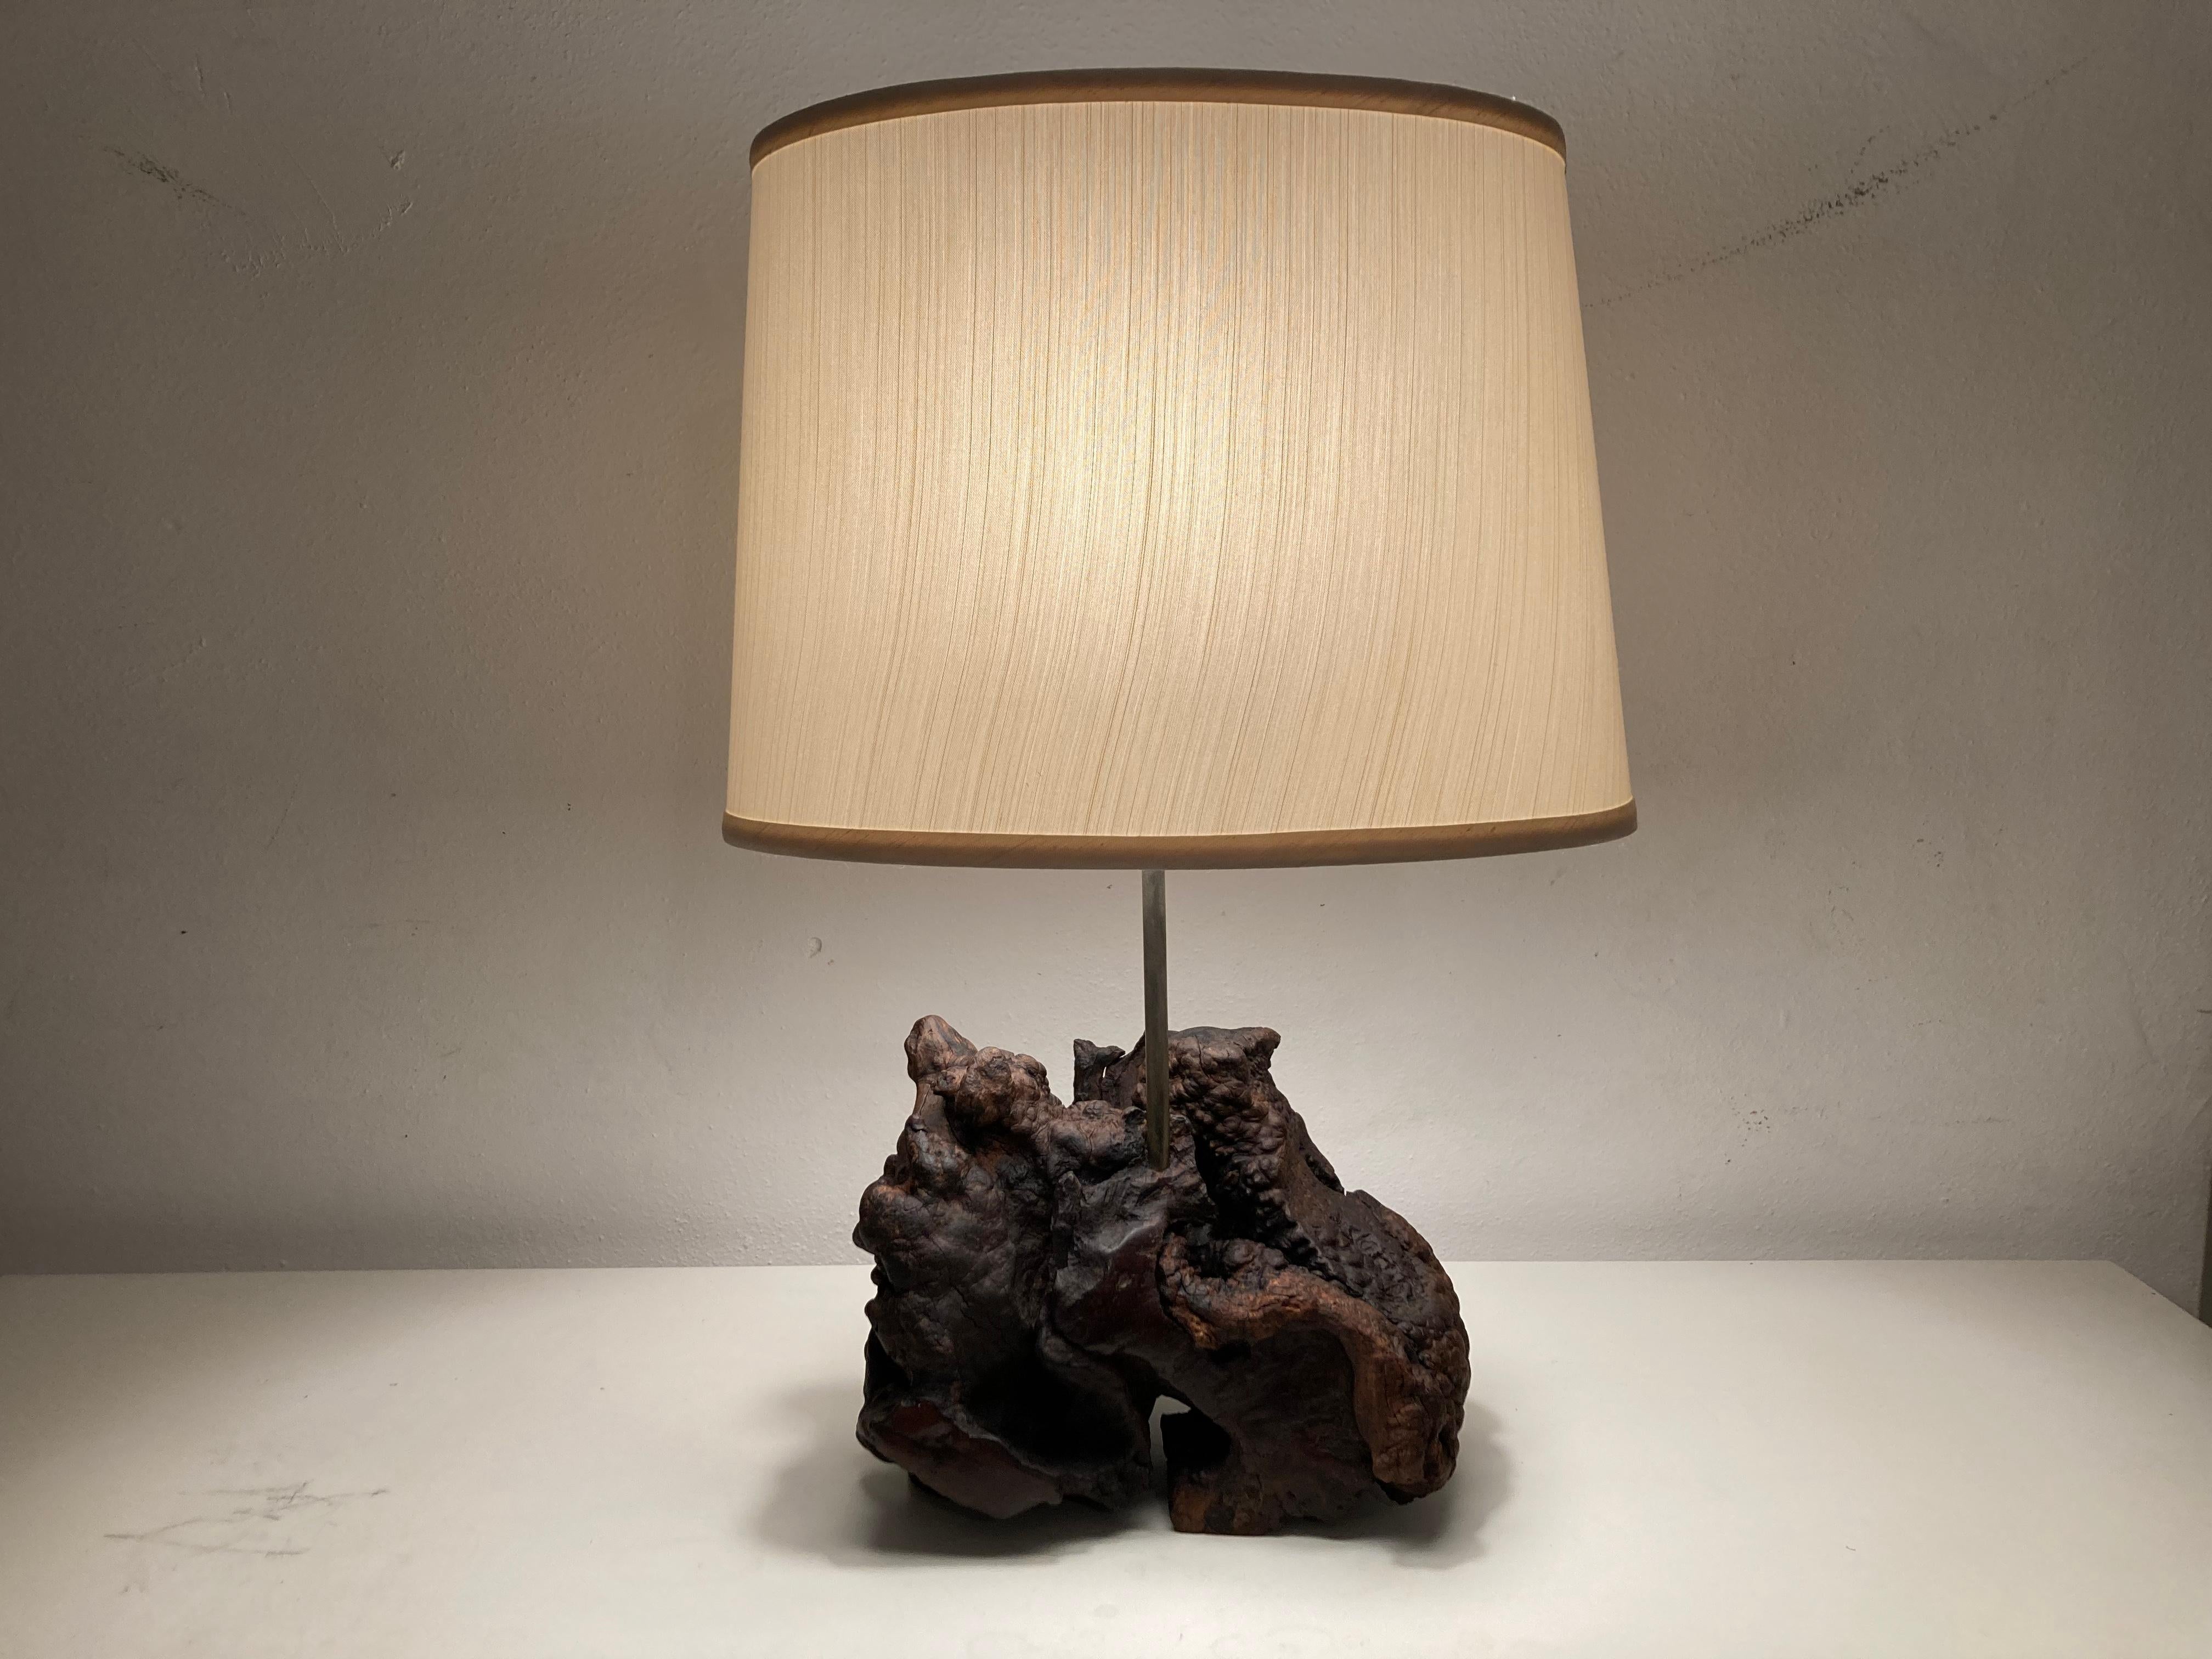 Great Mid Century Modern Burl Table Lamp in the style of George Nakashima. 